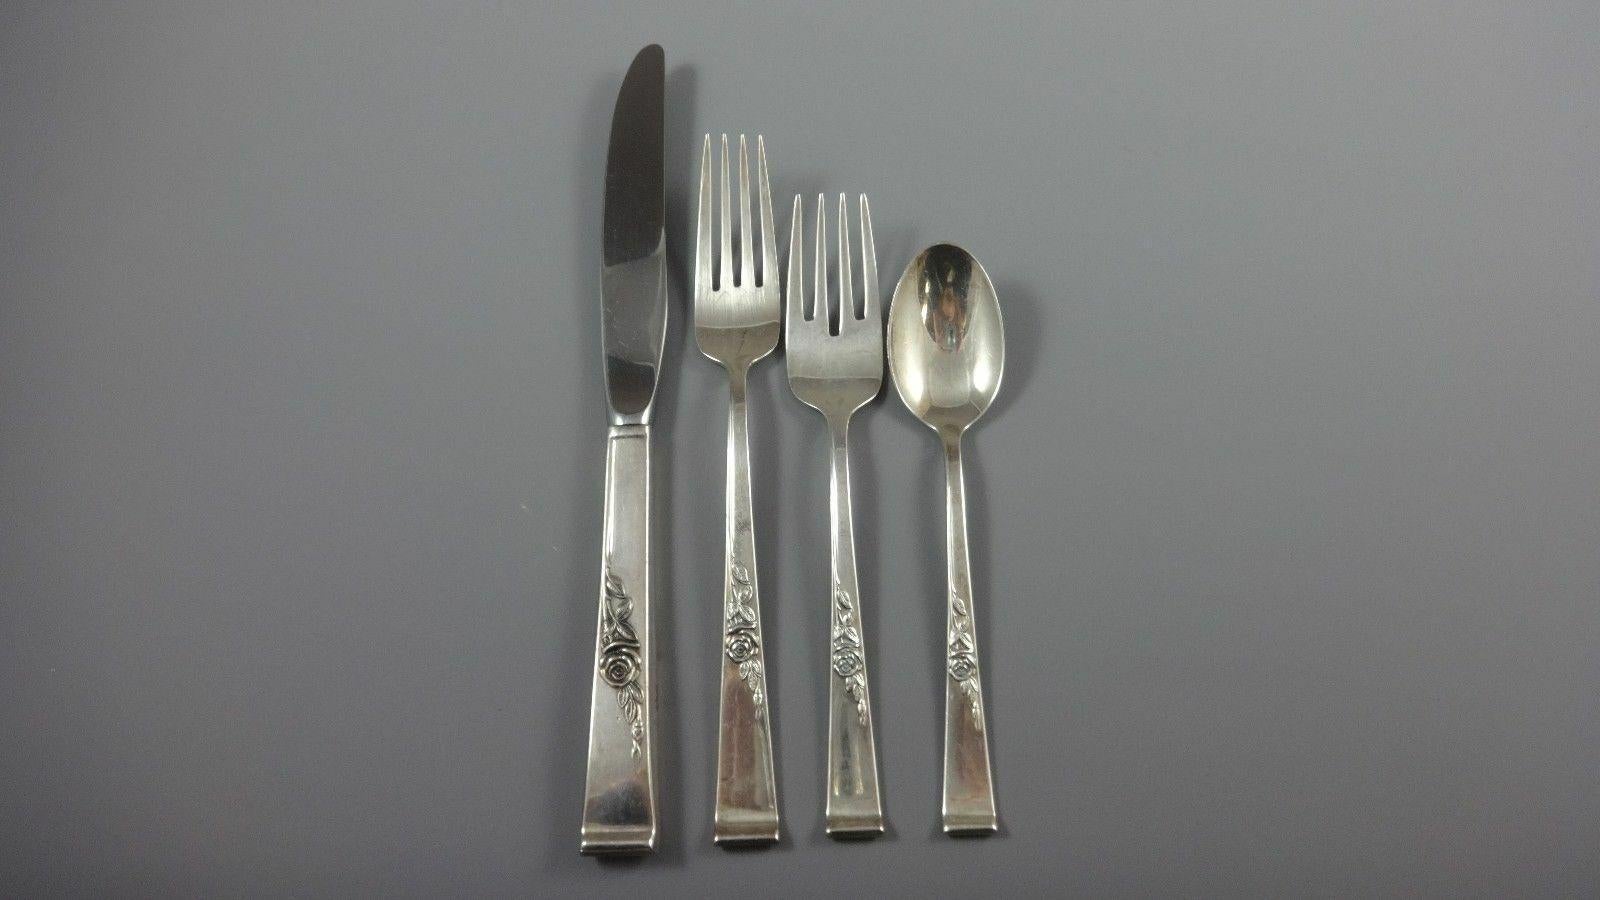 Classic rose by Reed & Barton sterling silver flatware set of 66 pieces. This set includes:

12 knives, 9 1/8